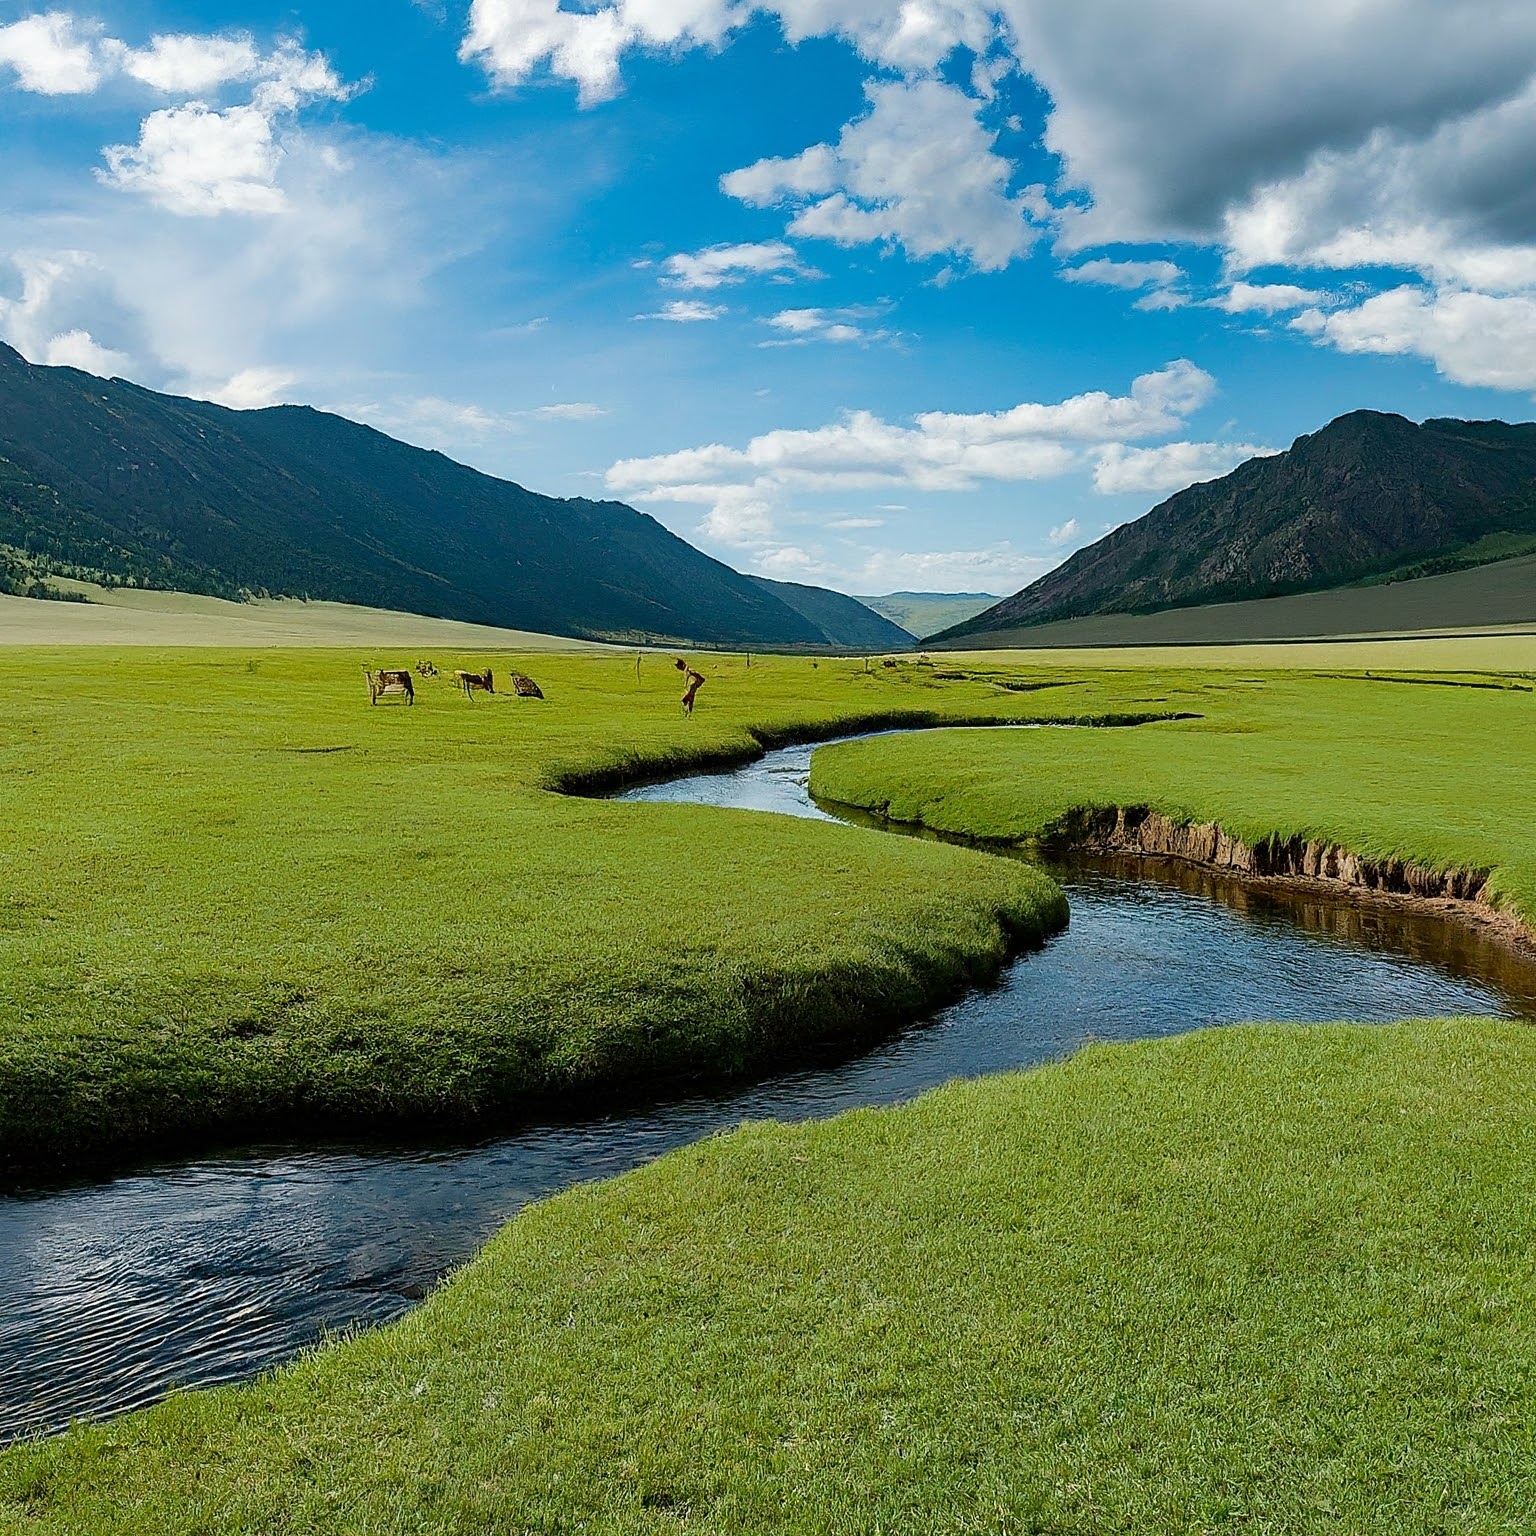 Lush green valley with a river and wild deer in Hustai National Park, Mongolia.